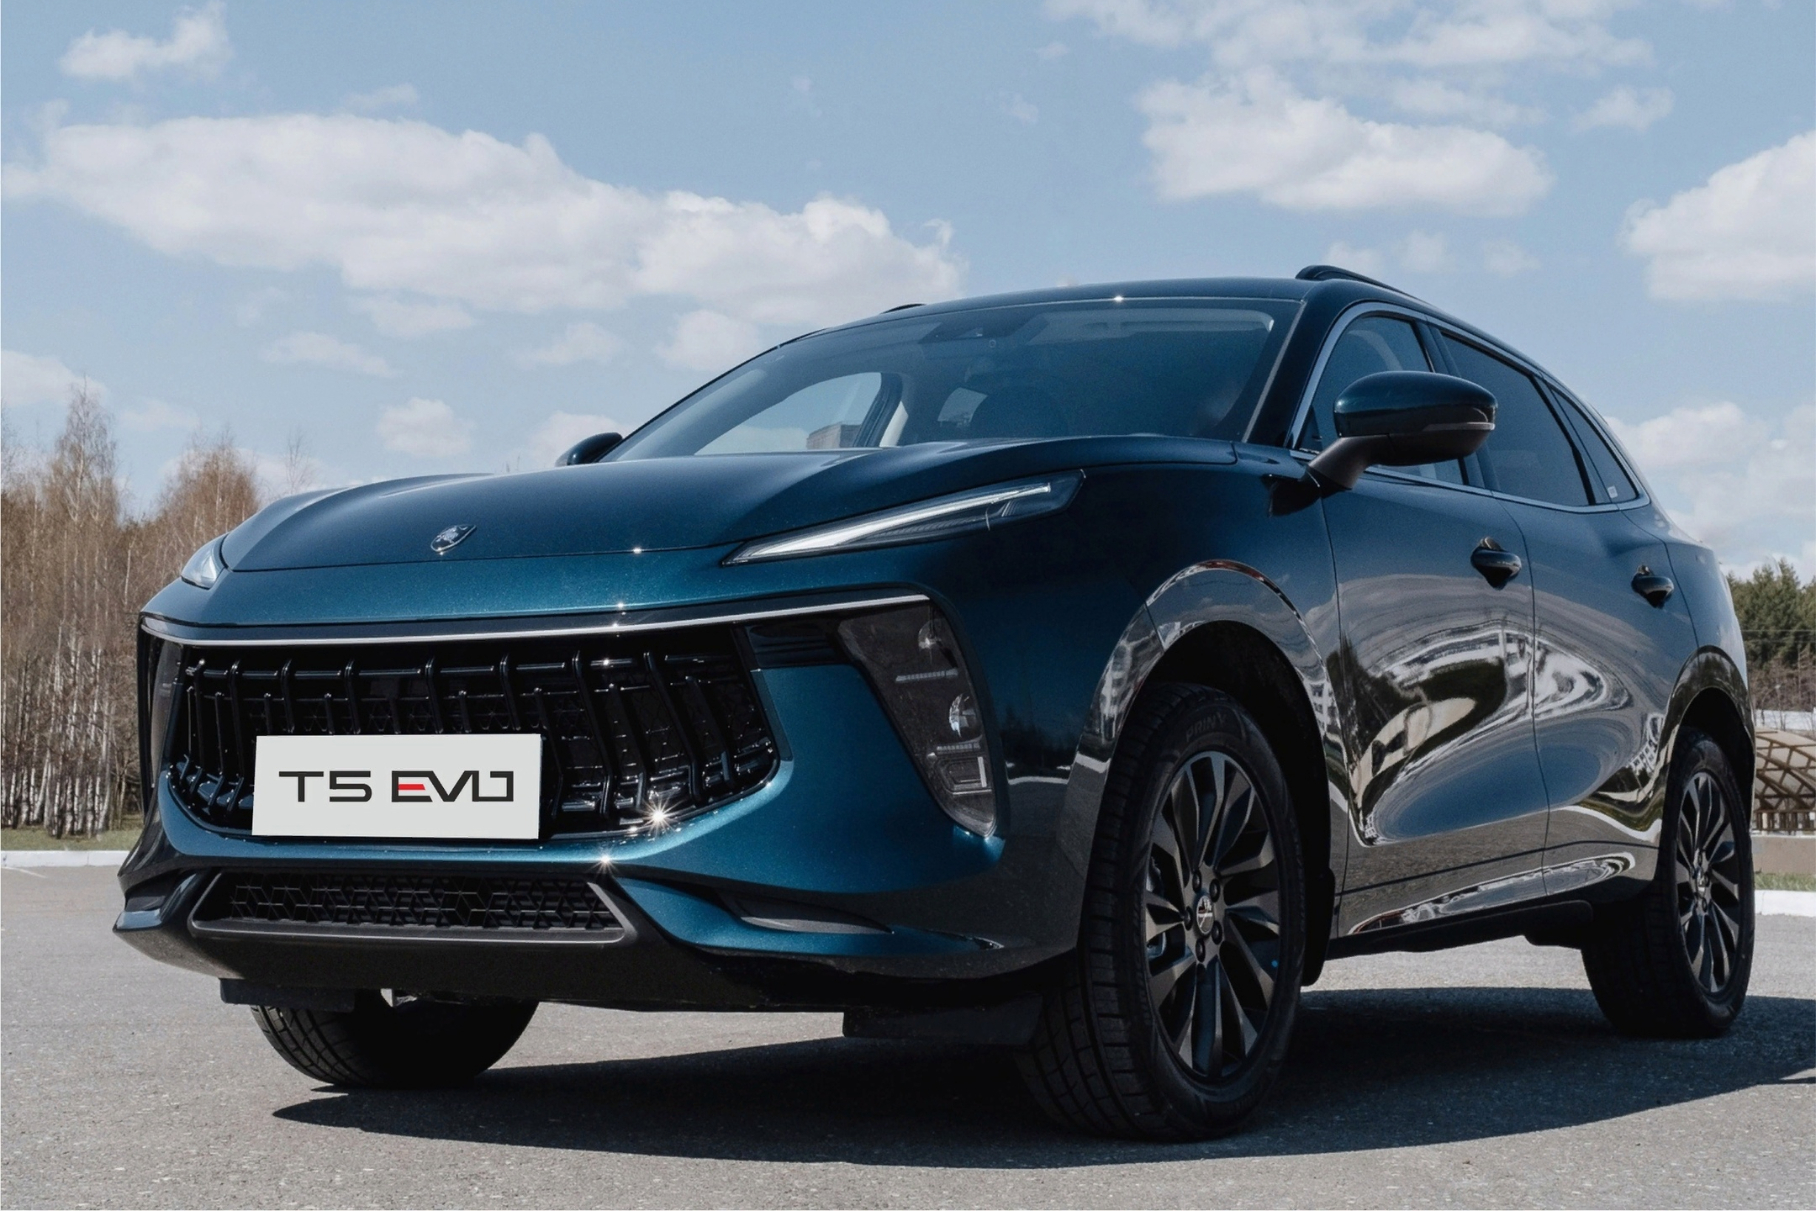 The Forthing crossover, similar to the Lamborghini Urus, has dropped sharply in Russia